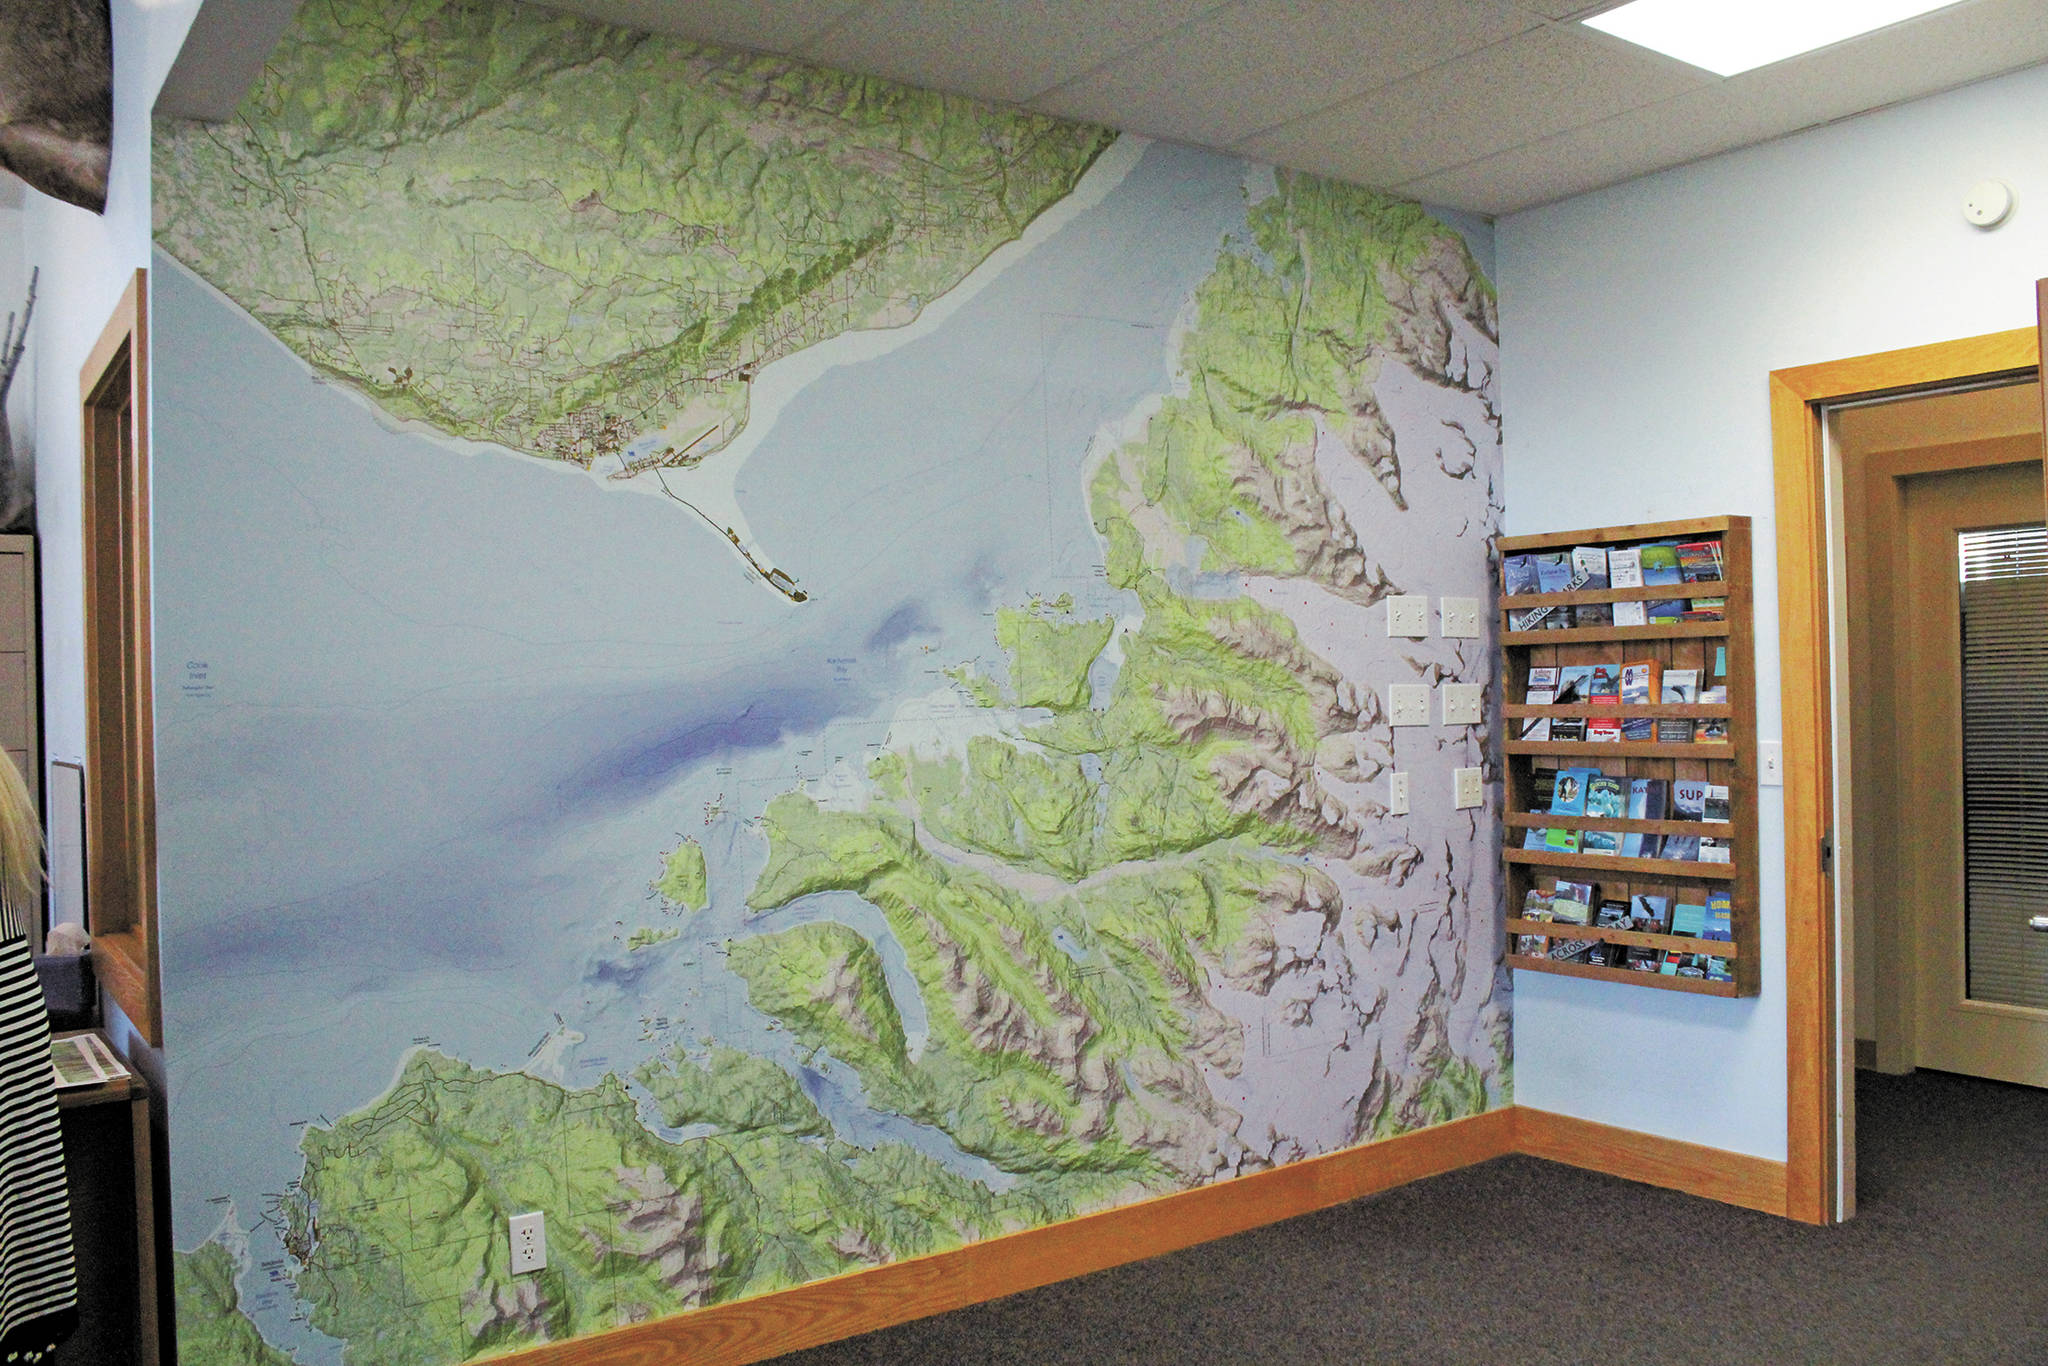 A detailed map of Kachemak Bay State Park, designed by Brentwood Higman, adorns the wall of the Homer Chamber of Commerce & Visitor Center during a celebration of the park’s 50th anniversary Saturday, June 6, 2020 in Homer, Alaska. (Photo by Megan Pacer/Homer News)